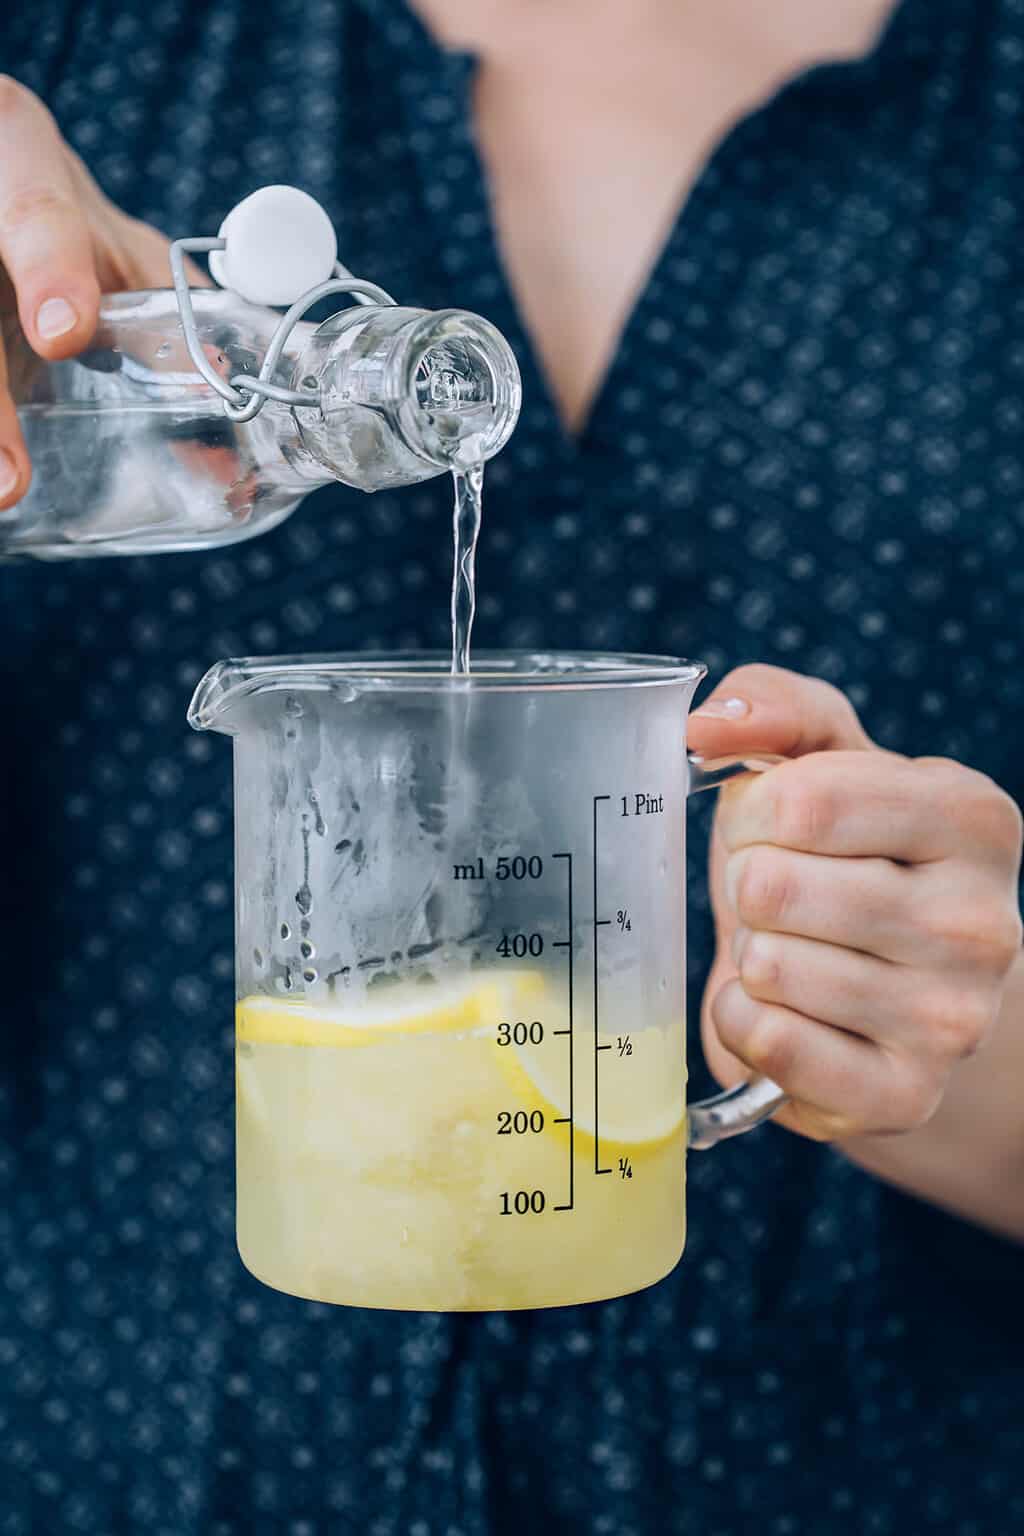 our favorite hack for squeezing in morning lemon water